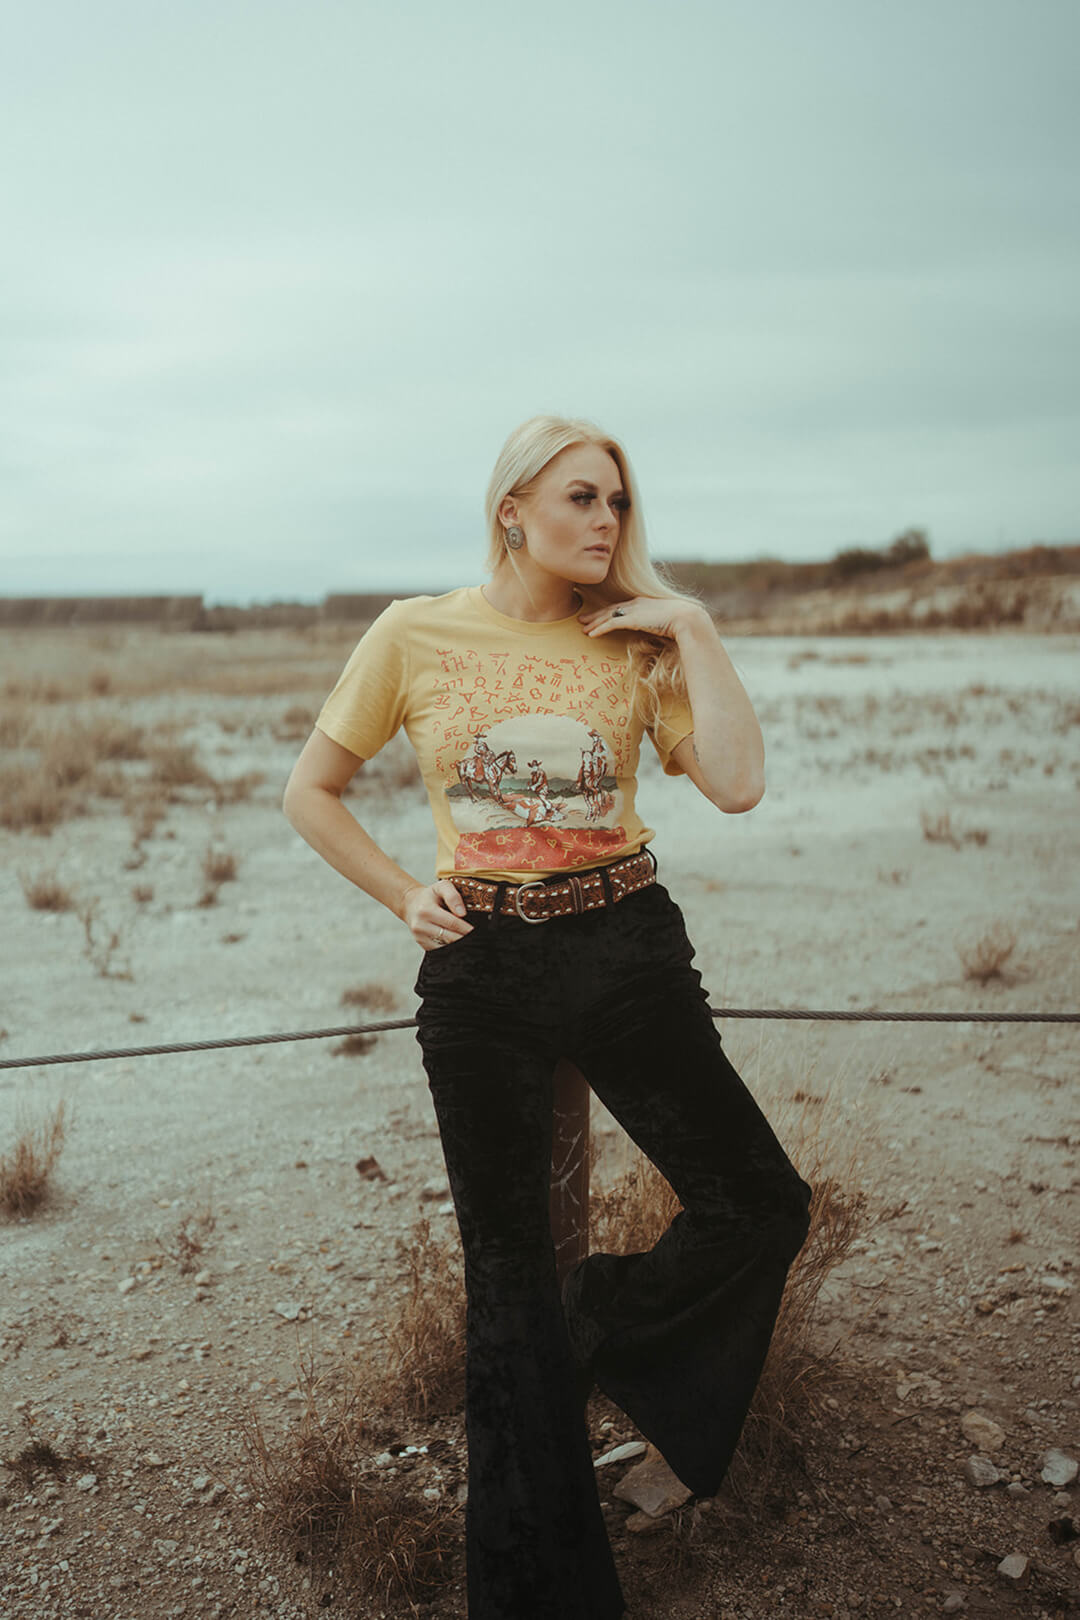 Picure of woman wearing a graphic tee yellow colored shirt with image of cowboys branding cows.  